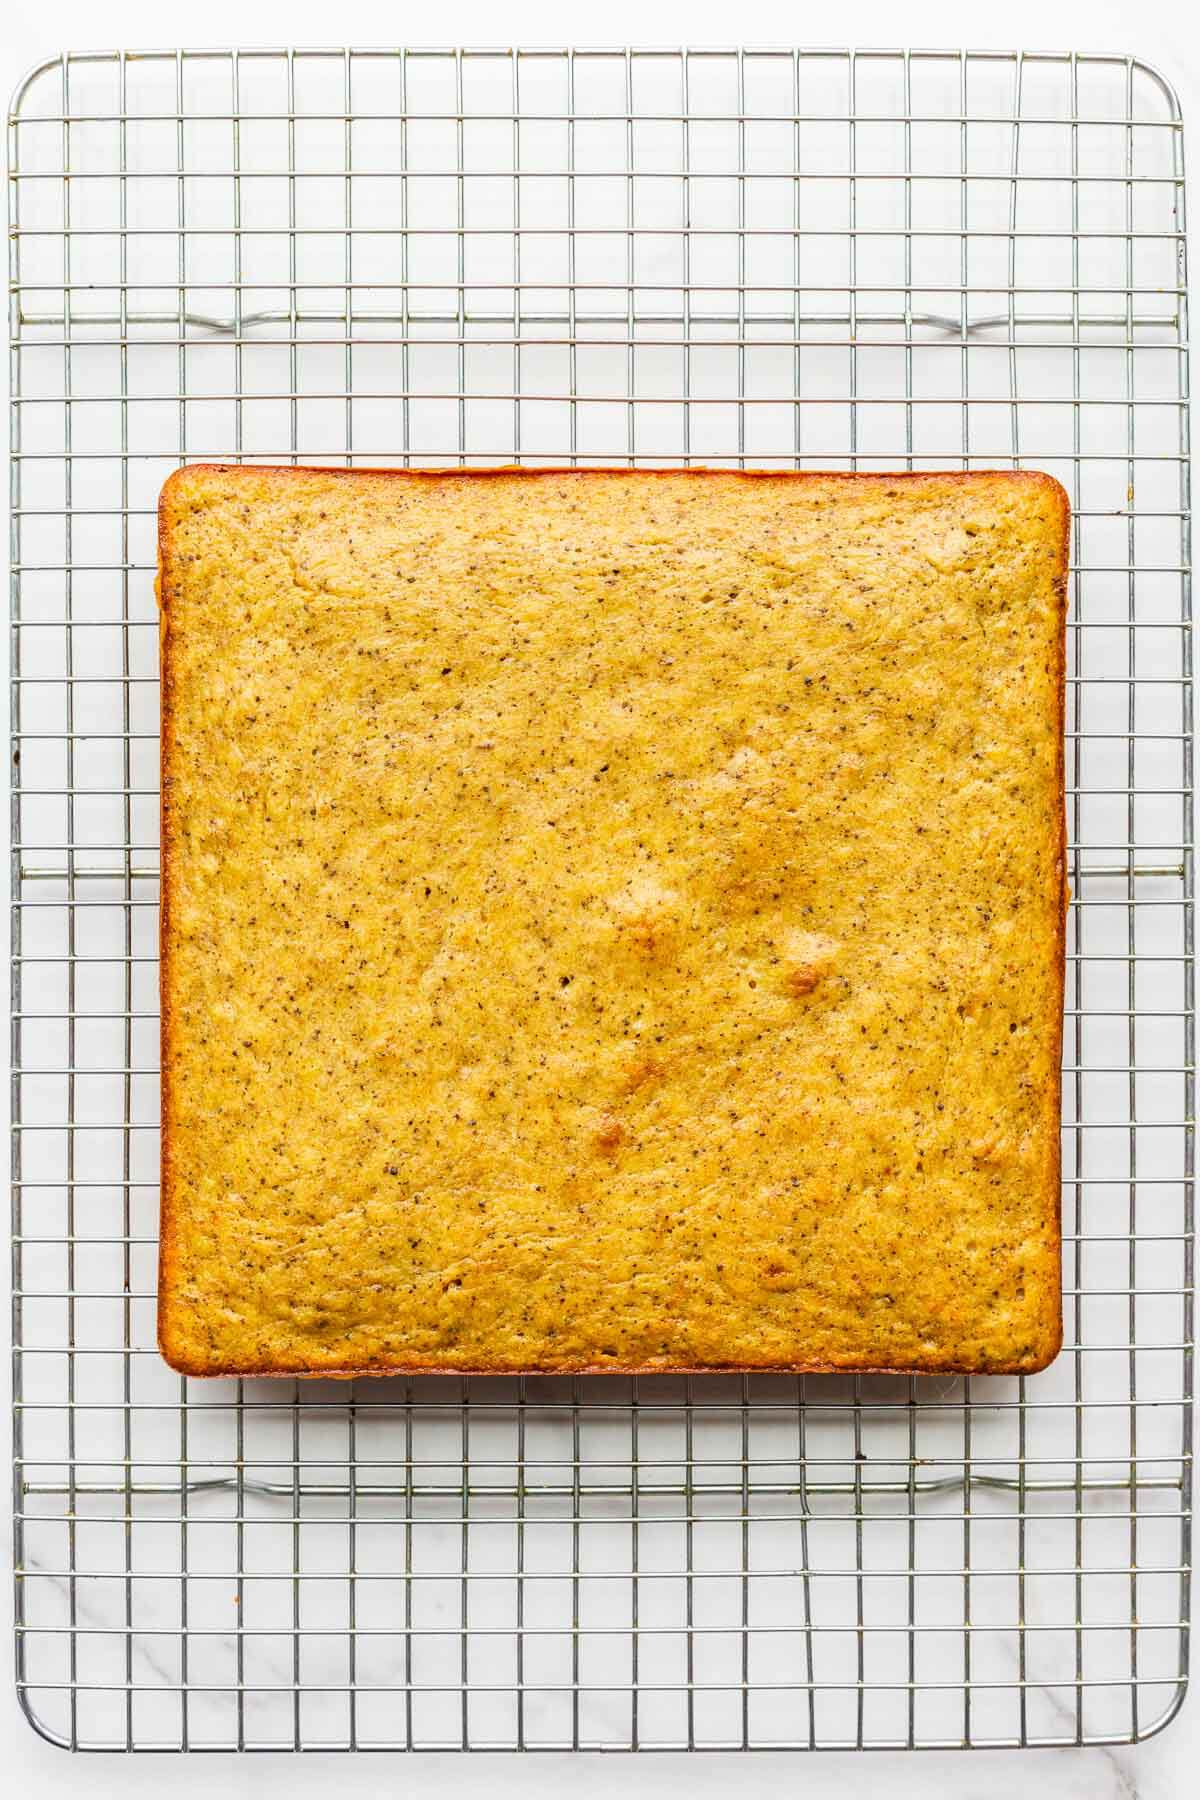 A square banana snack cake on a cooling rack.